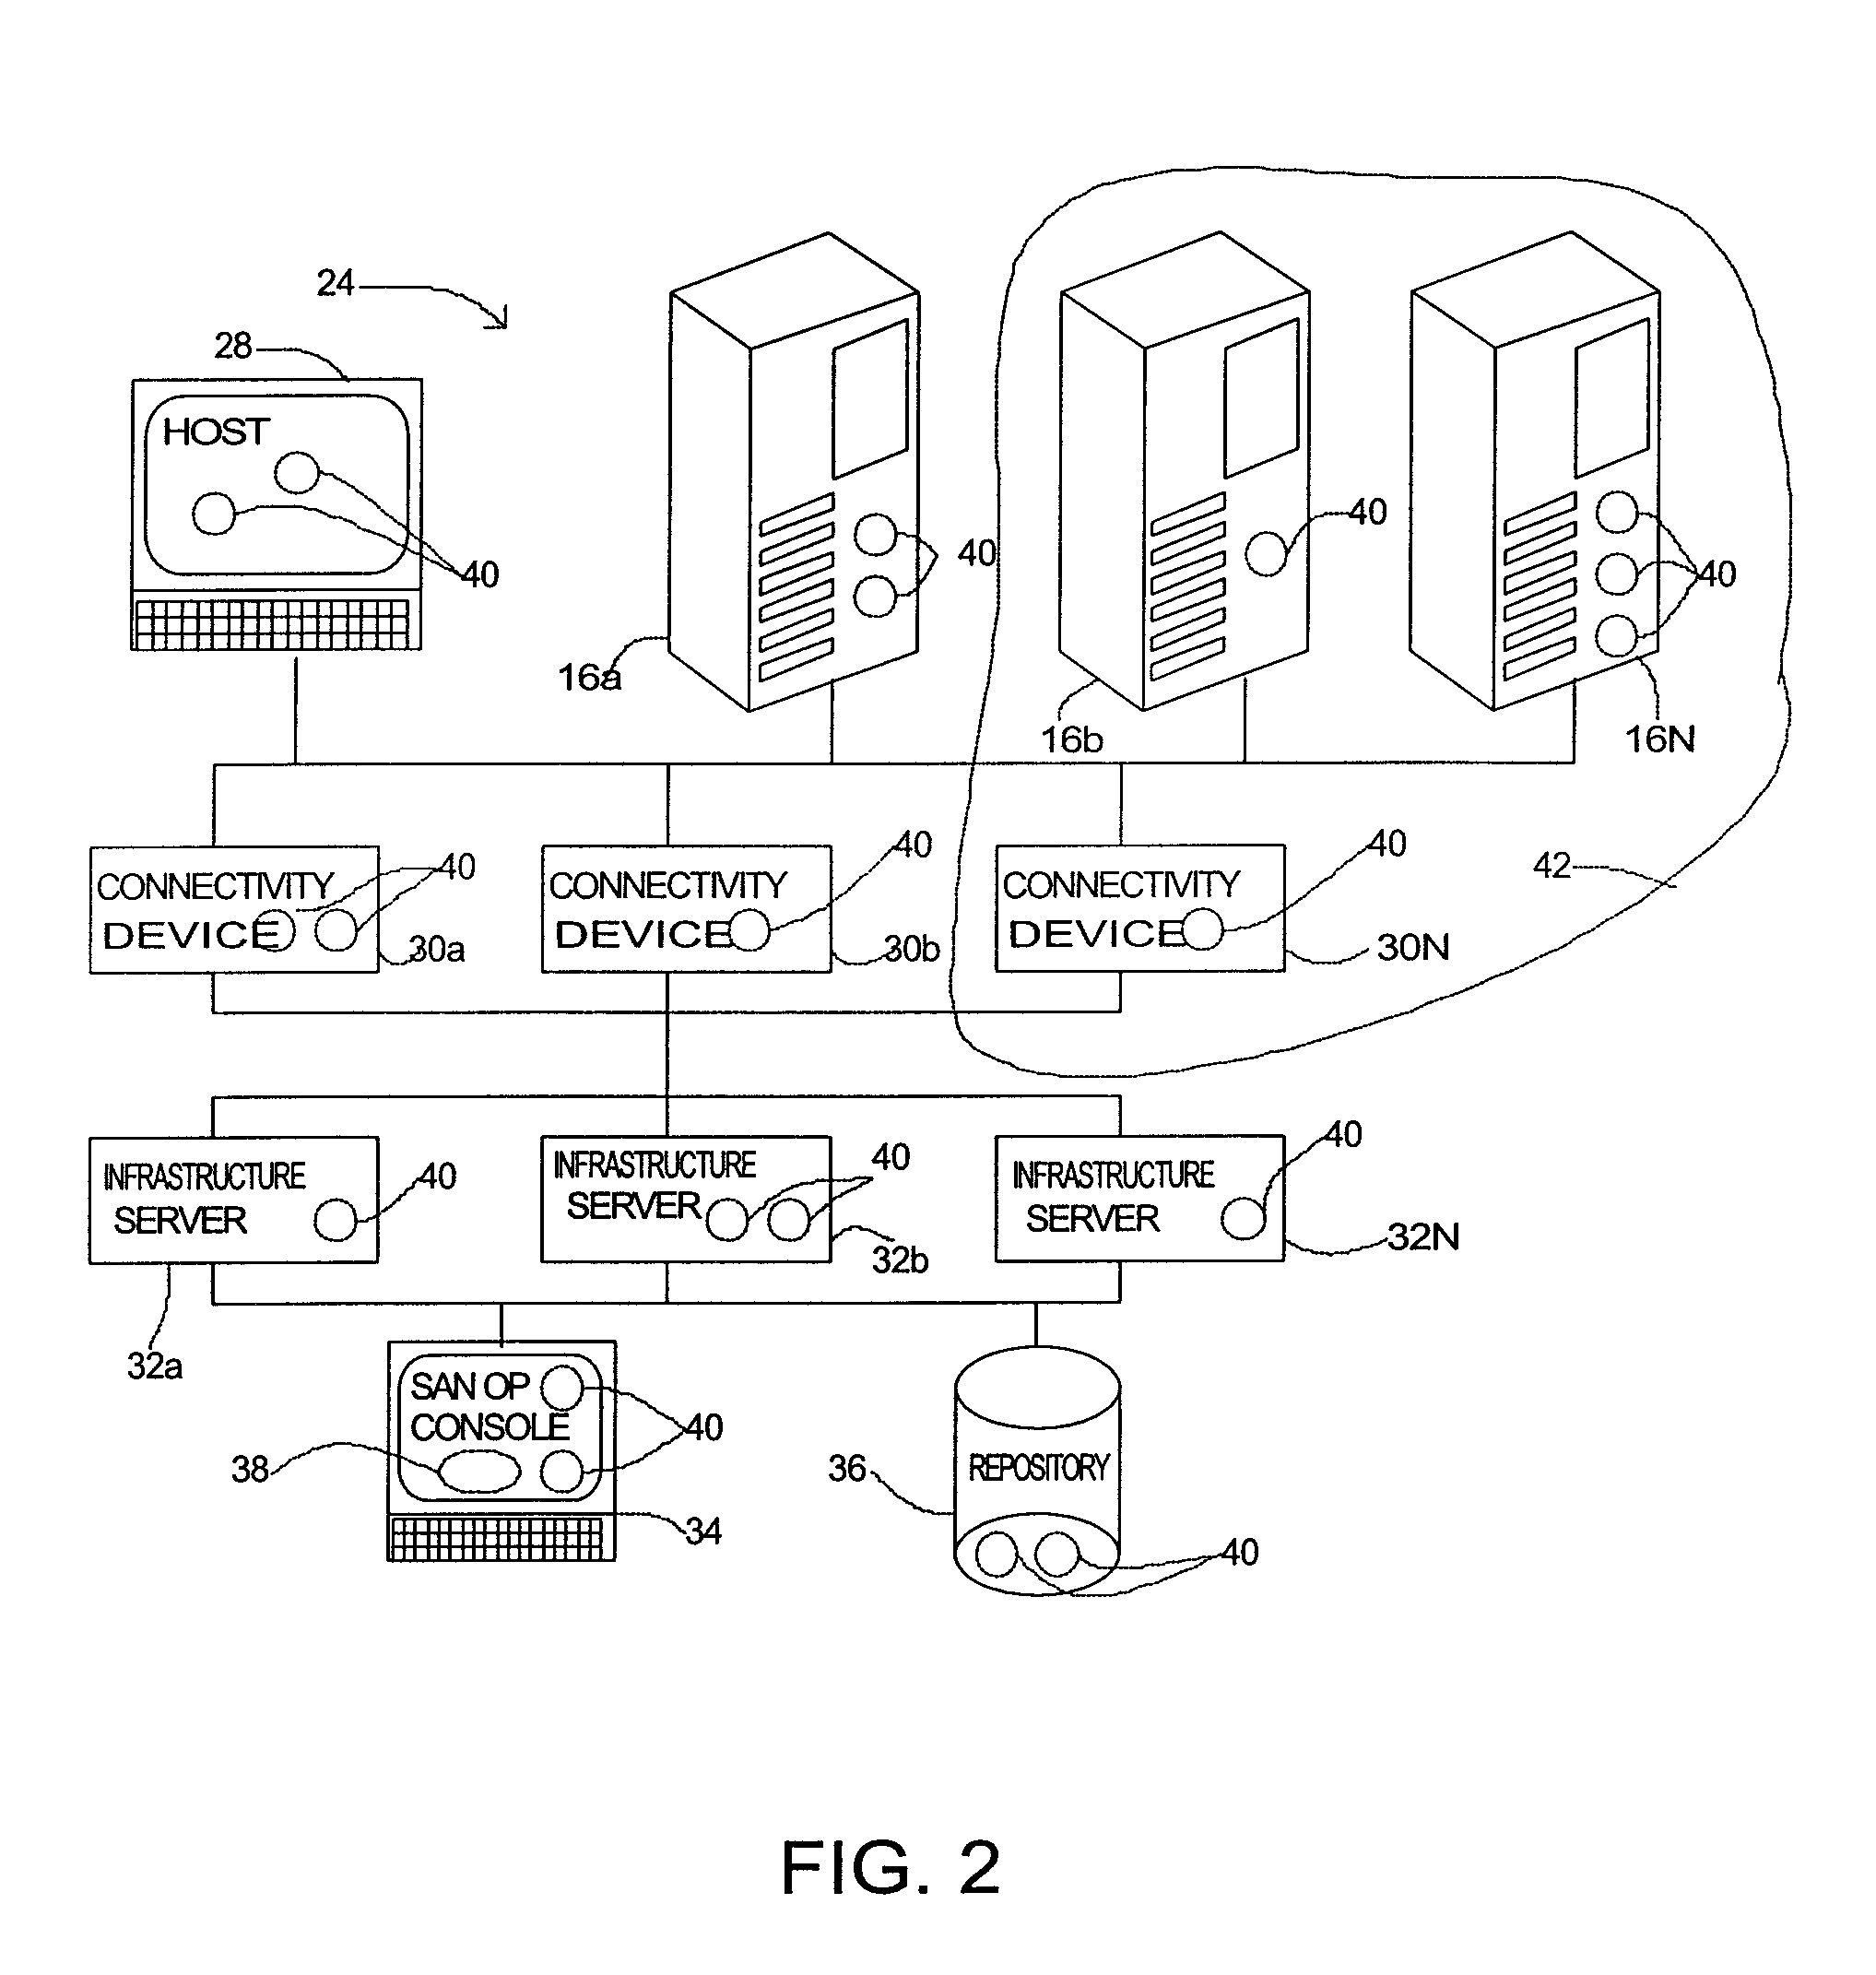 Methods and apparatus providing an extensible manageable entity model for a network